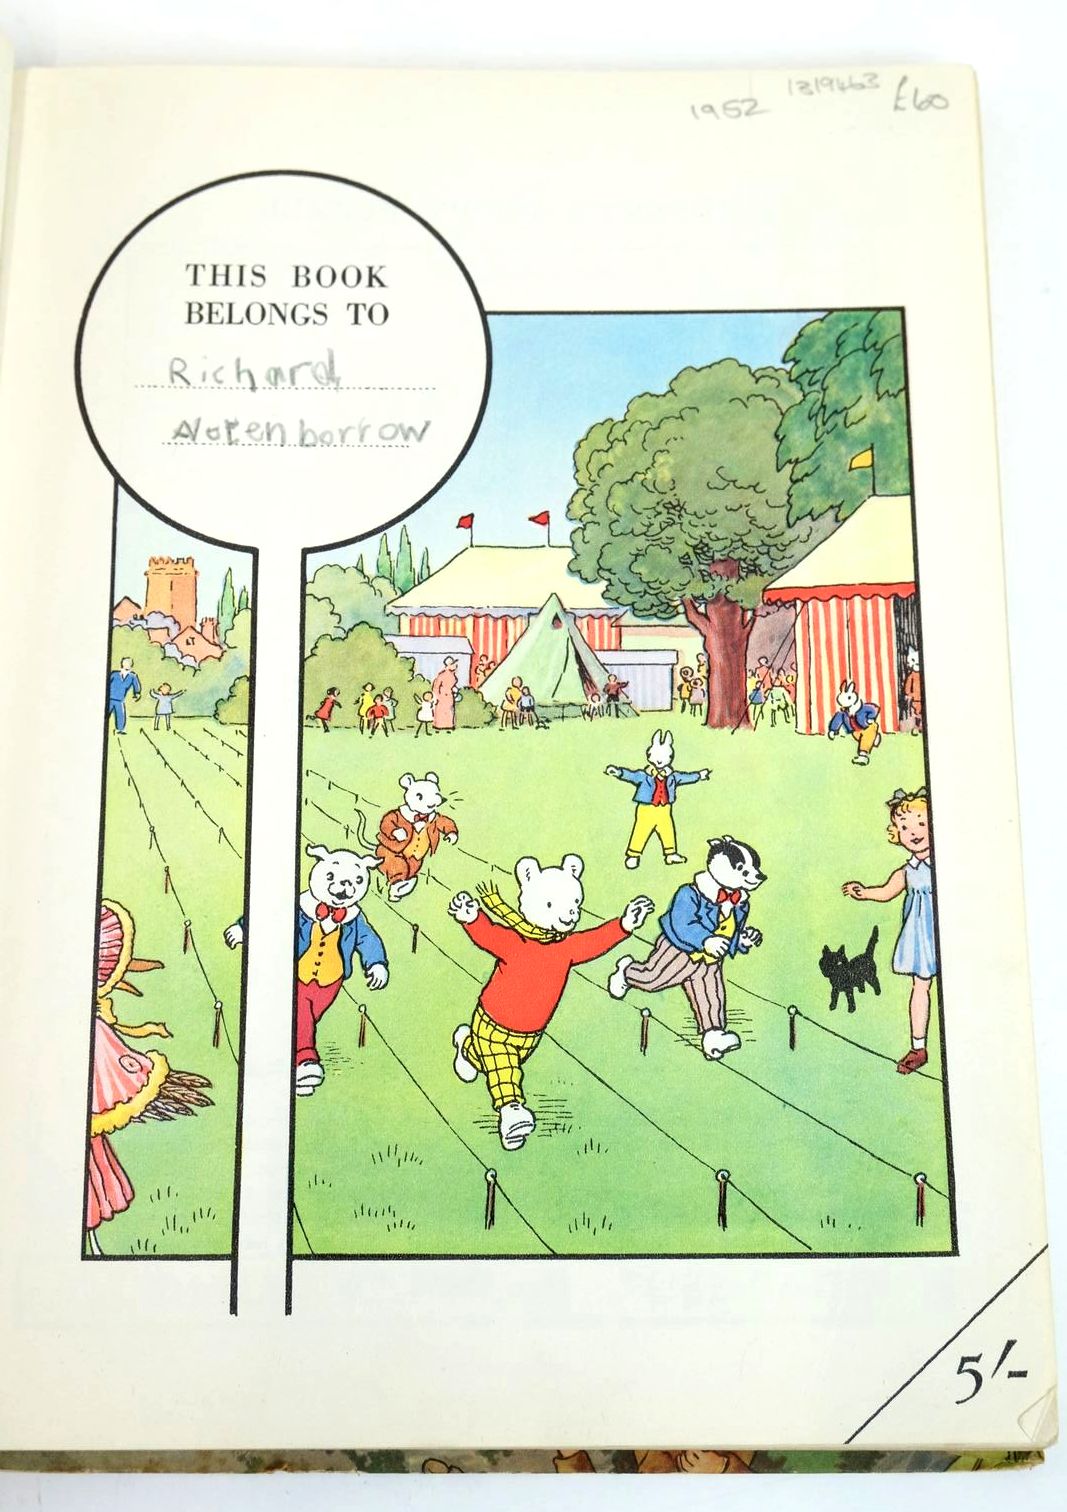 Photo of RUPERT ANNUAL 1952 - MORE RUPERT ADVENTURES written by Bestall, Alfred illustrated by Bestall, Alfred published by Daily Express (STOCK CODE: 1319463)  for sale by Stella & Rose's Books